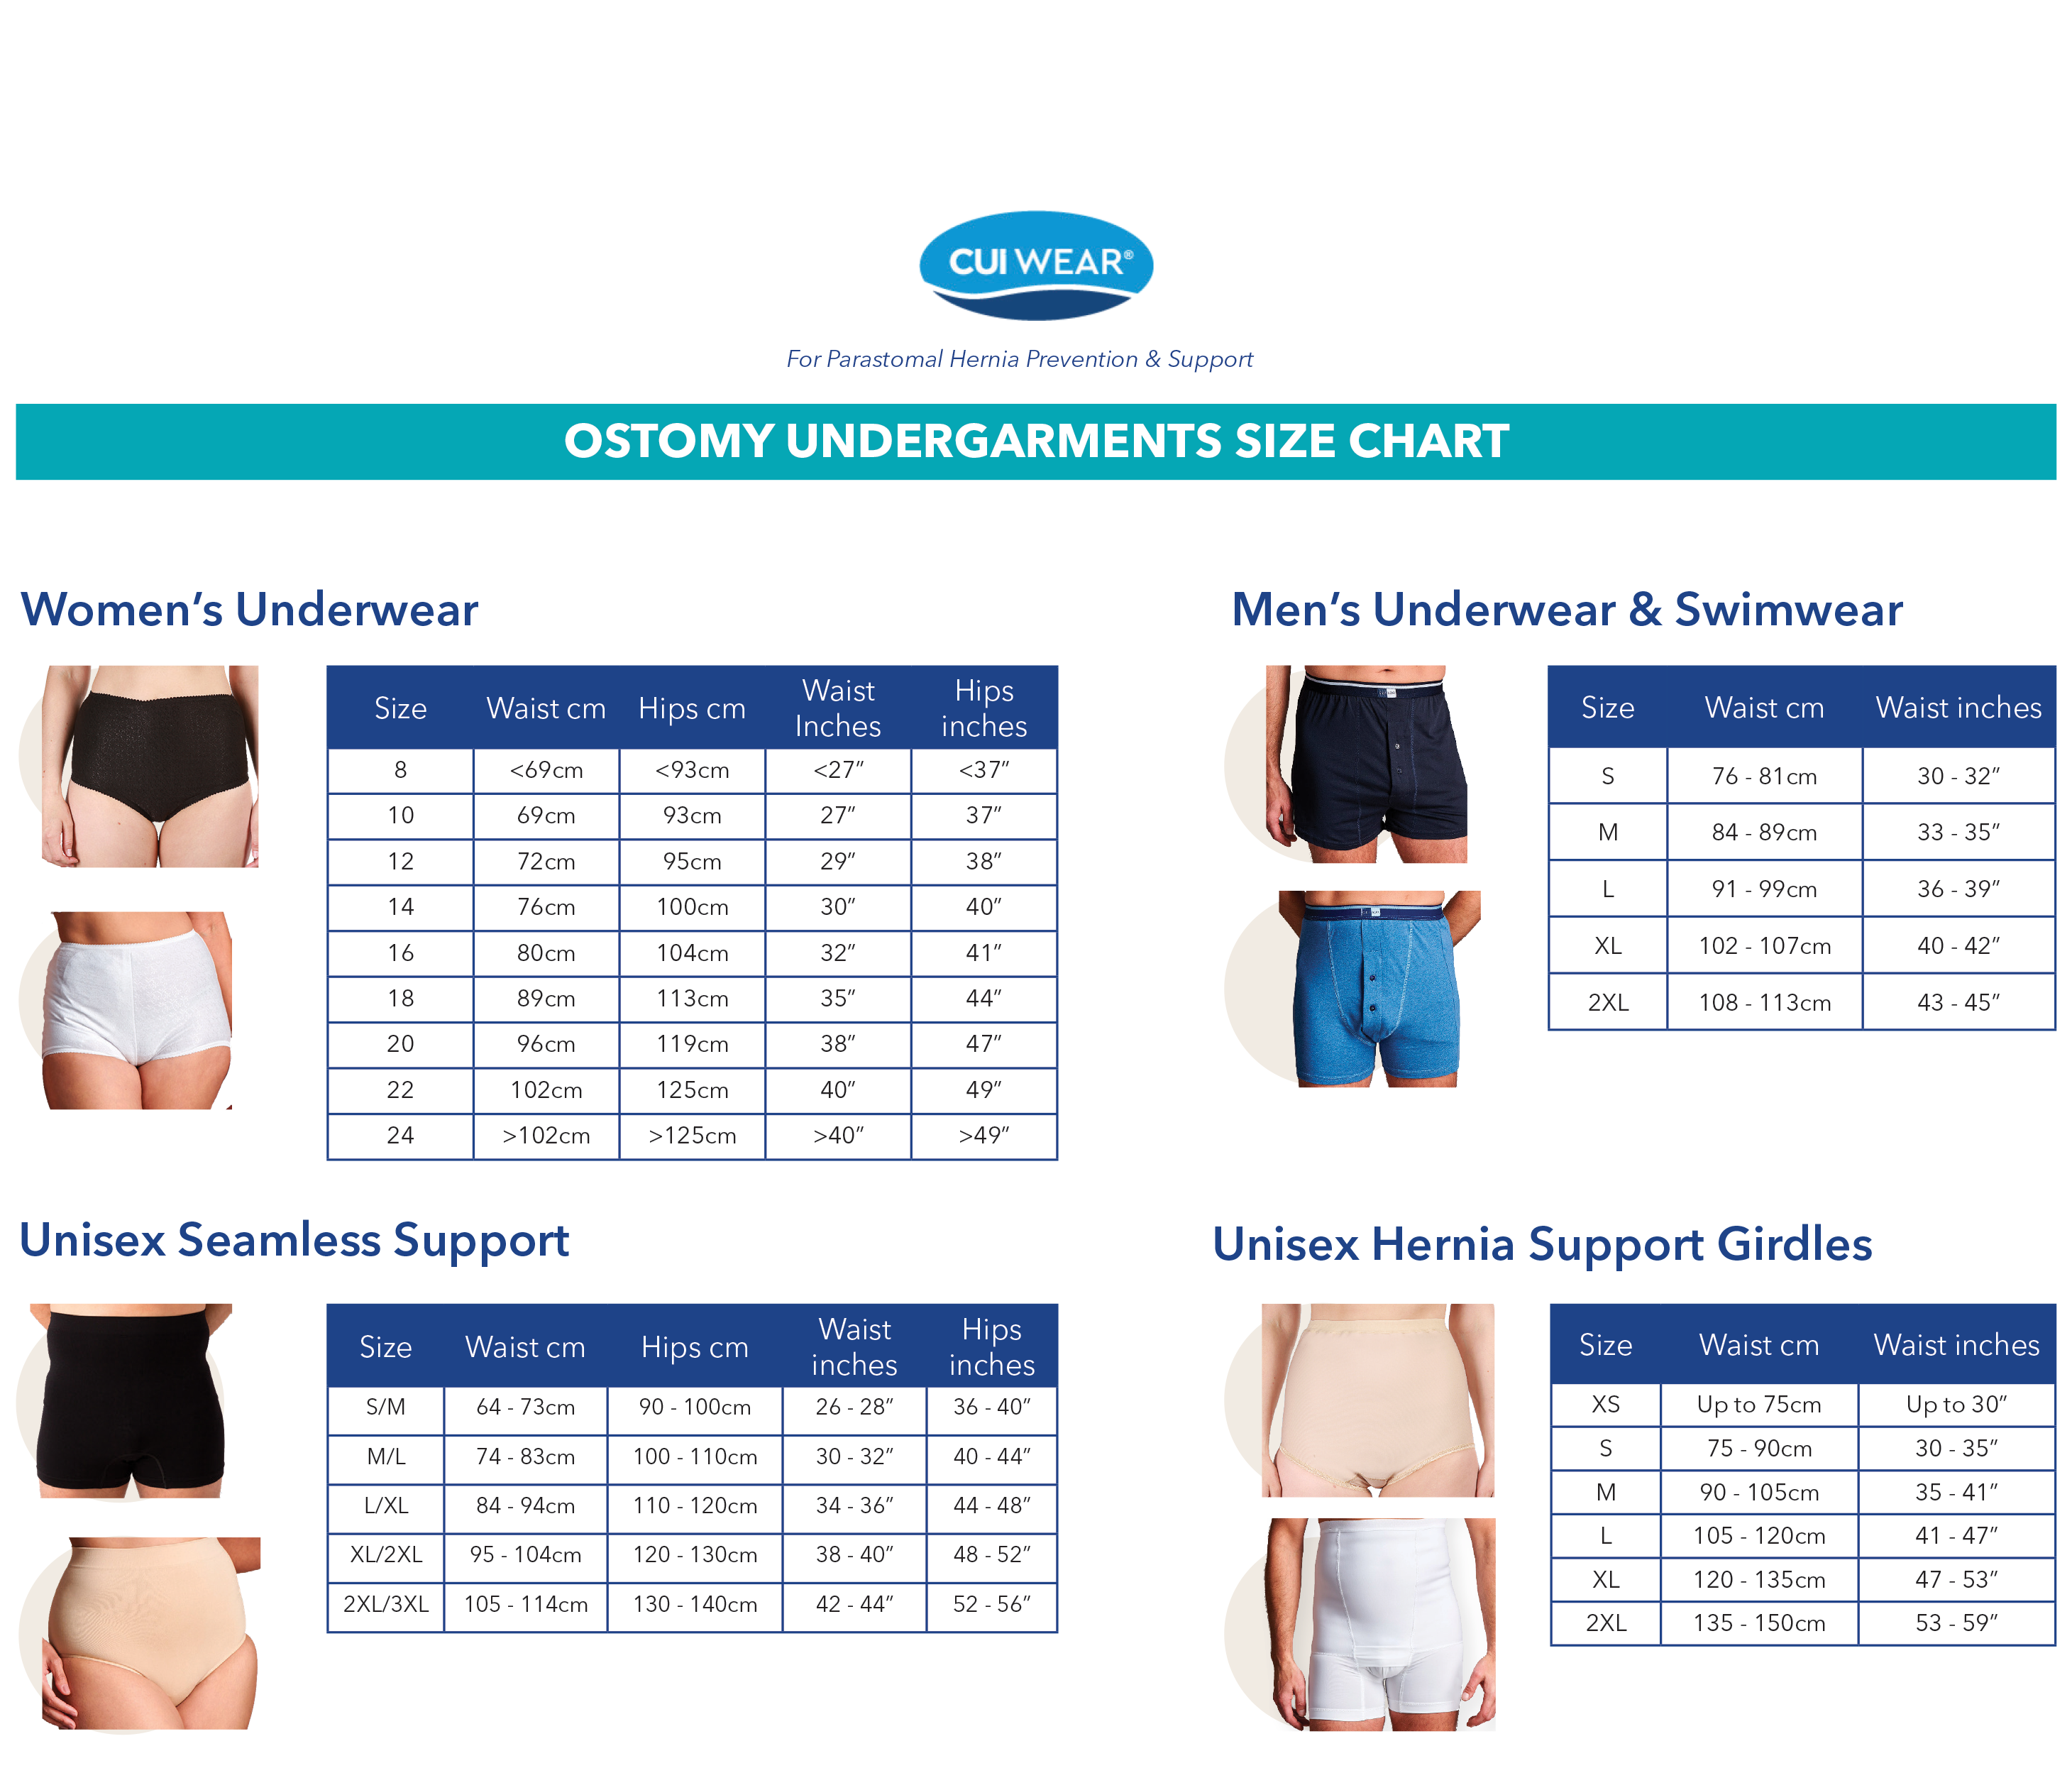 CUI Mens Hernia Low Waist Support Girdle With Legs - 1 each, LARGE, WHITE